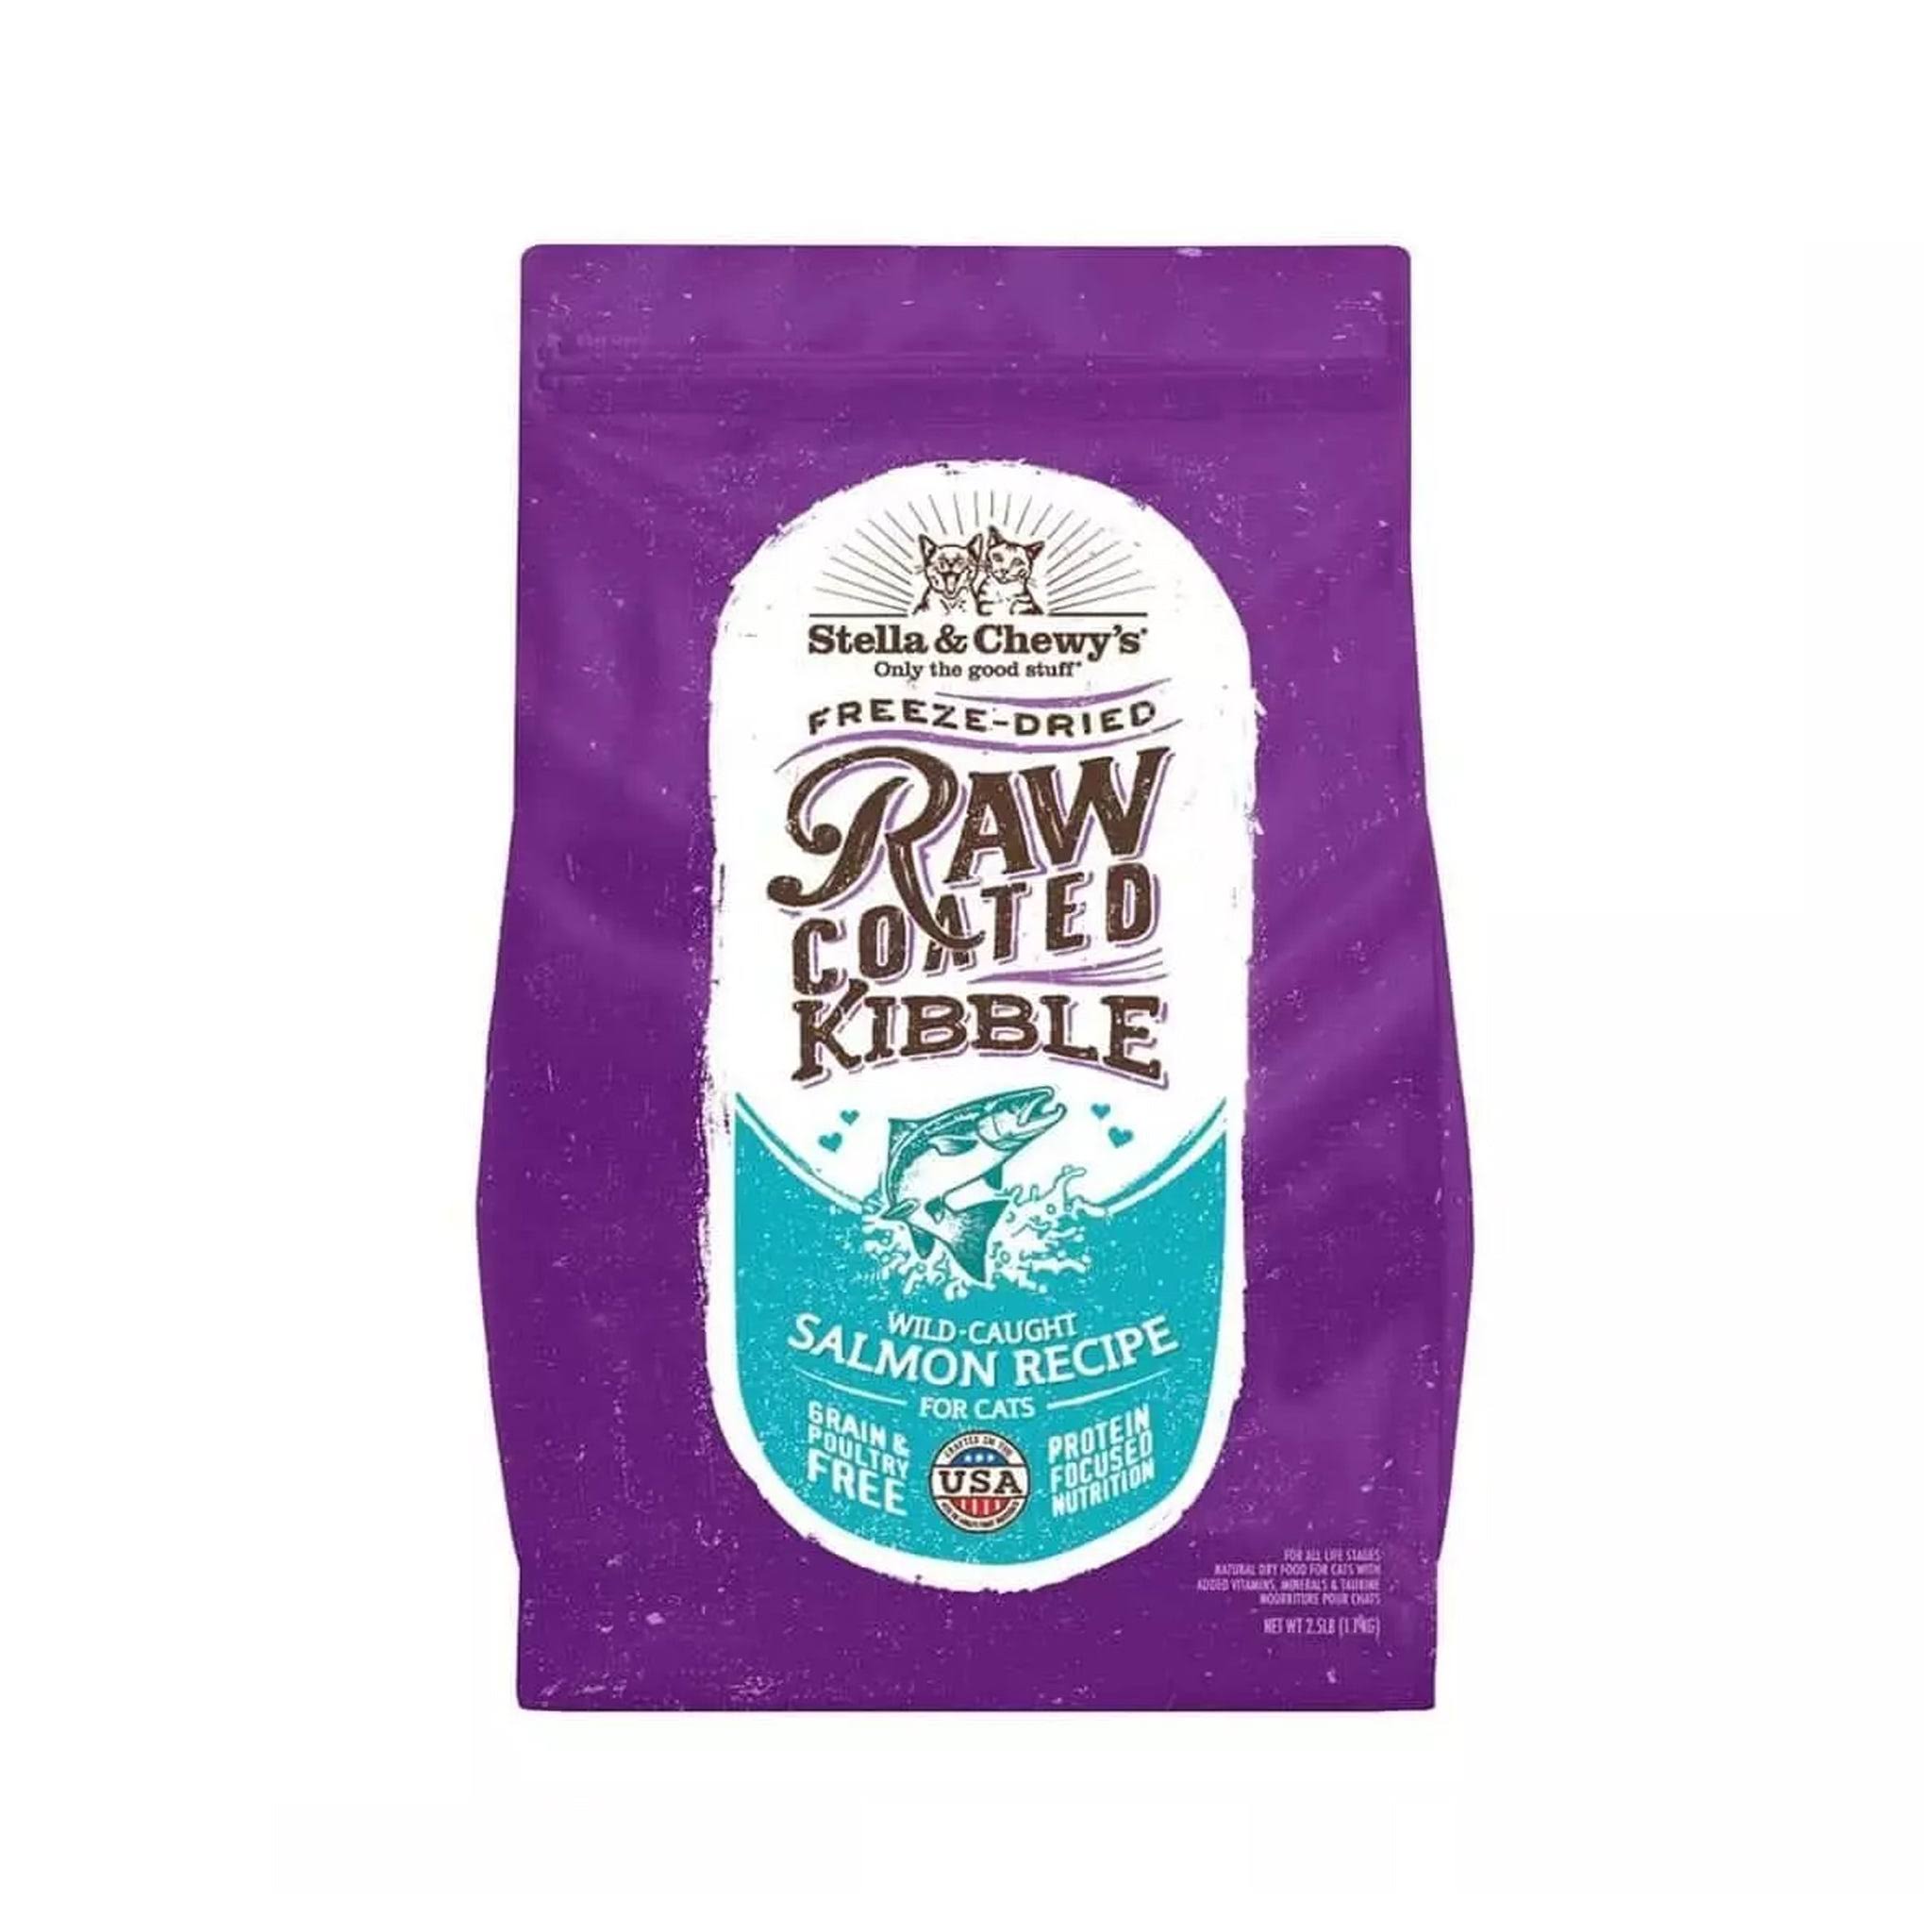 Stella & Chewy's Raw Coated Kibble Wild Caught Salmon Recipe Dry Cat Food, 10 lbs